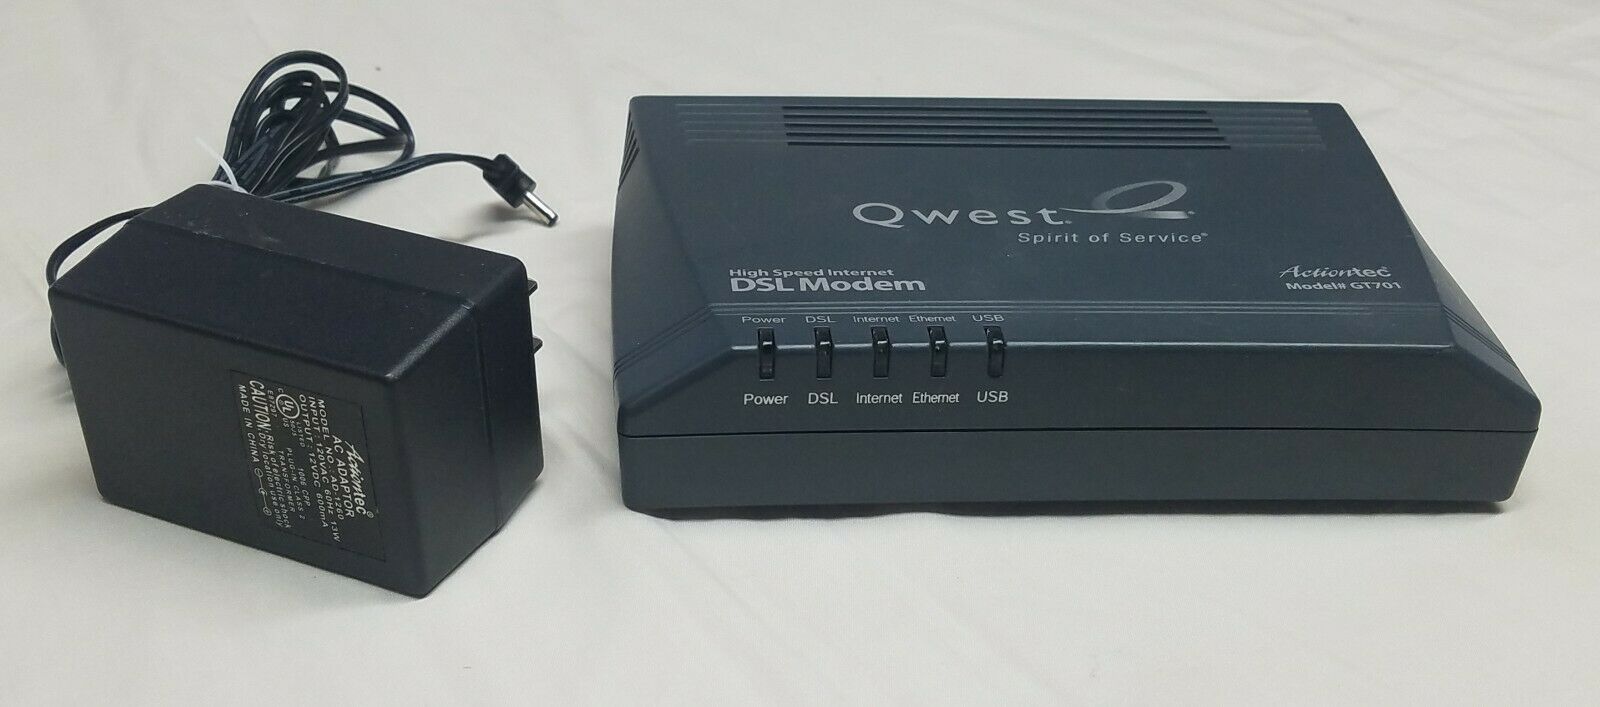 Actiontec Qwest DSL Modem Wireless Gateway GT701-WG AC power Adaptor AD-1260 power supply Brand: Action-Tec Type: